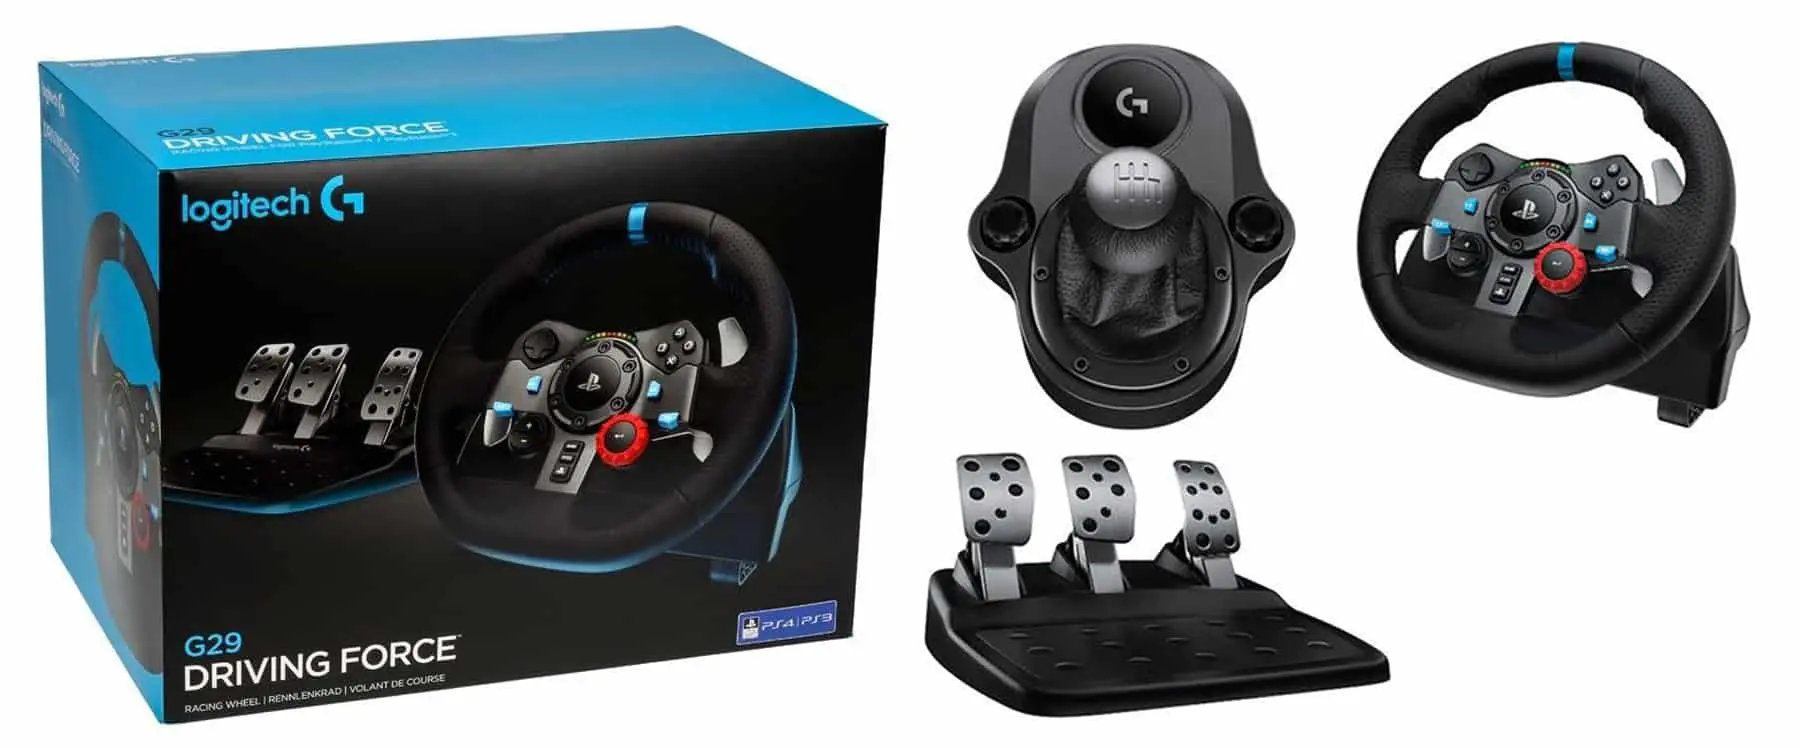 Logitech G29 Racing Wheel Review - the Driving Force Wheel ...